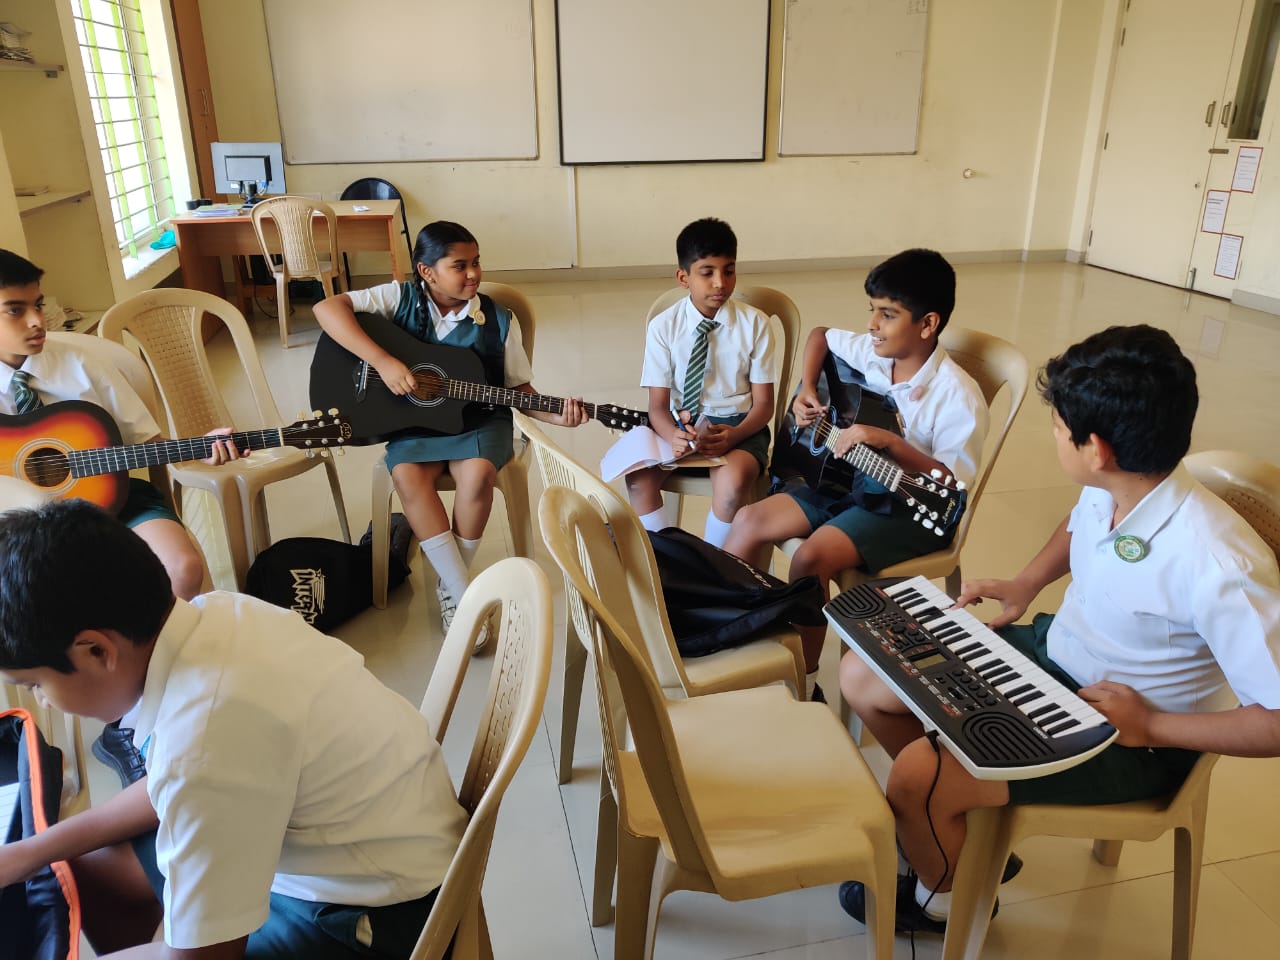 Experience the Joy of Music Education in our Vibrant Classrooms